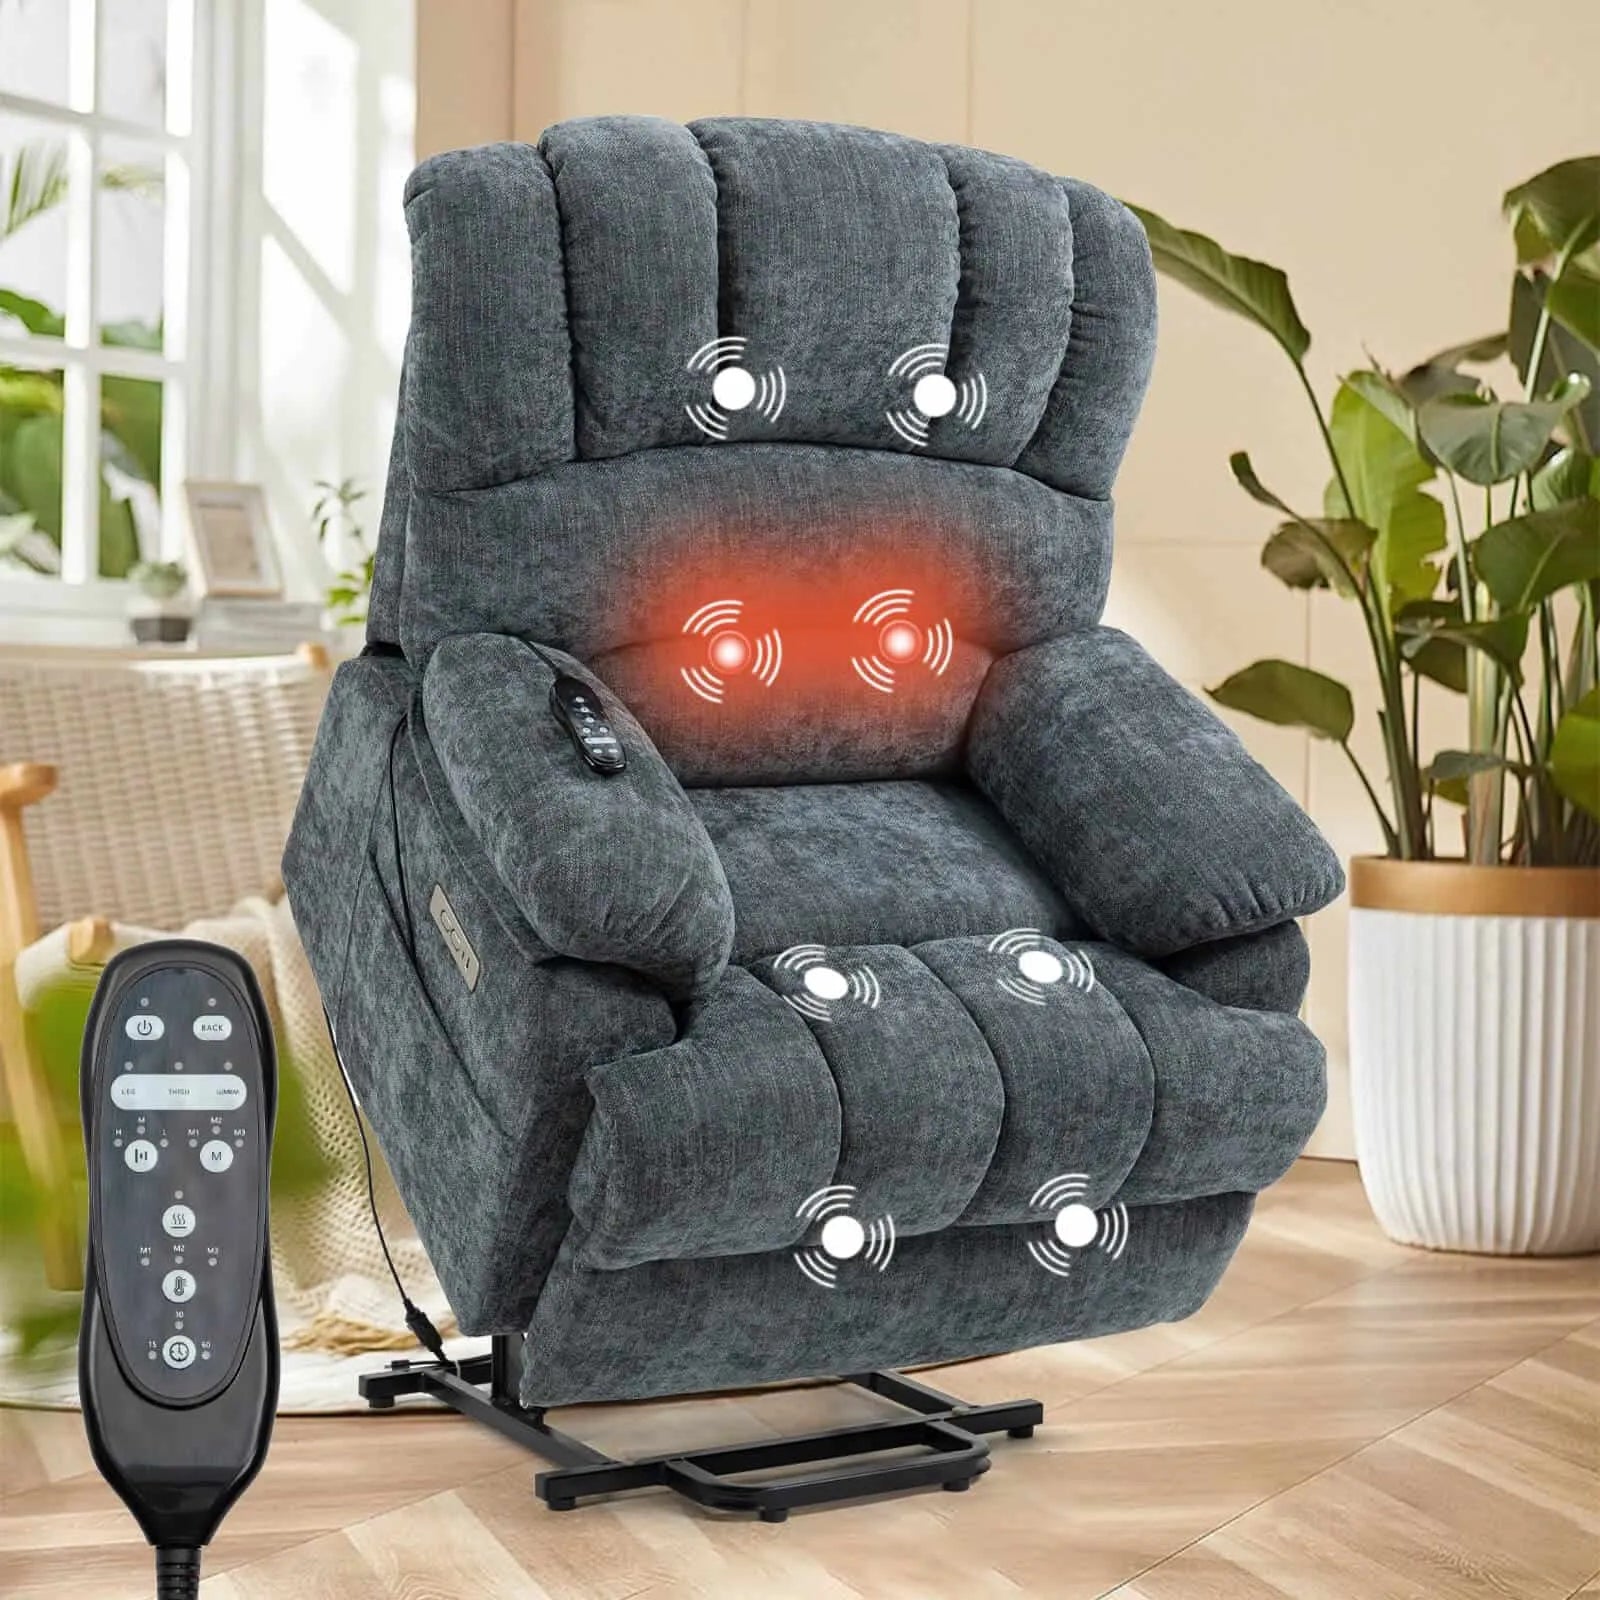 Small Lift Chair for Short People: Heat and Massage 23" Seat Power-Push Button Control